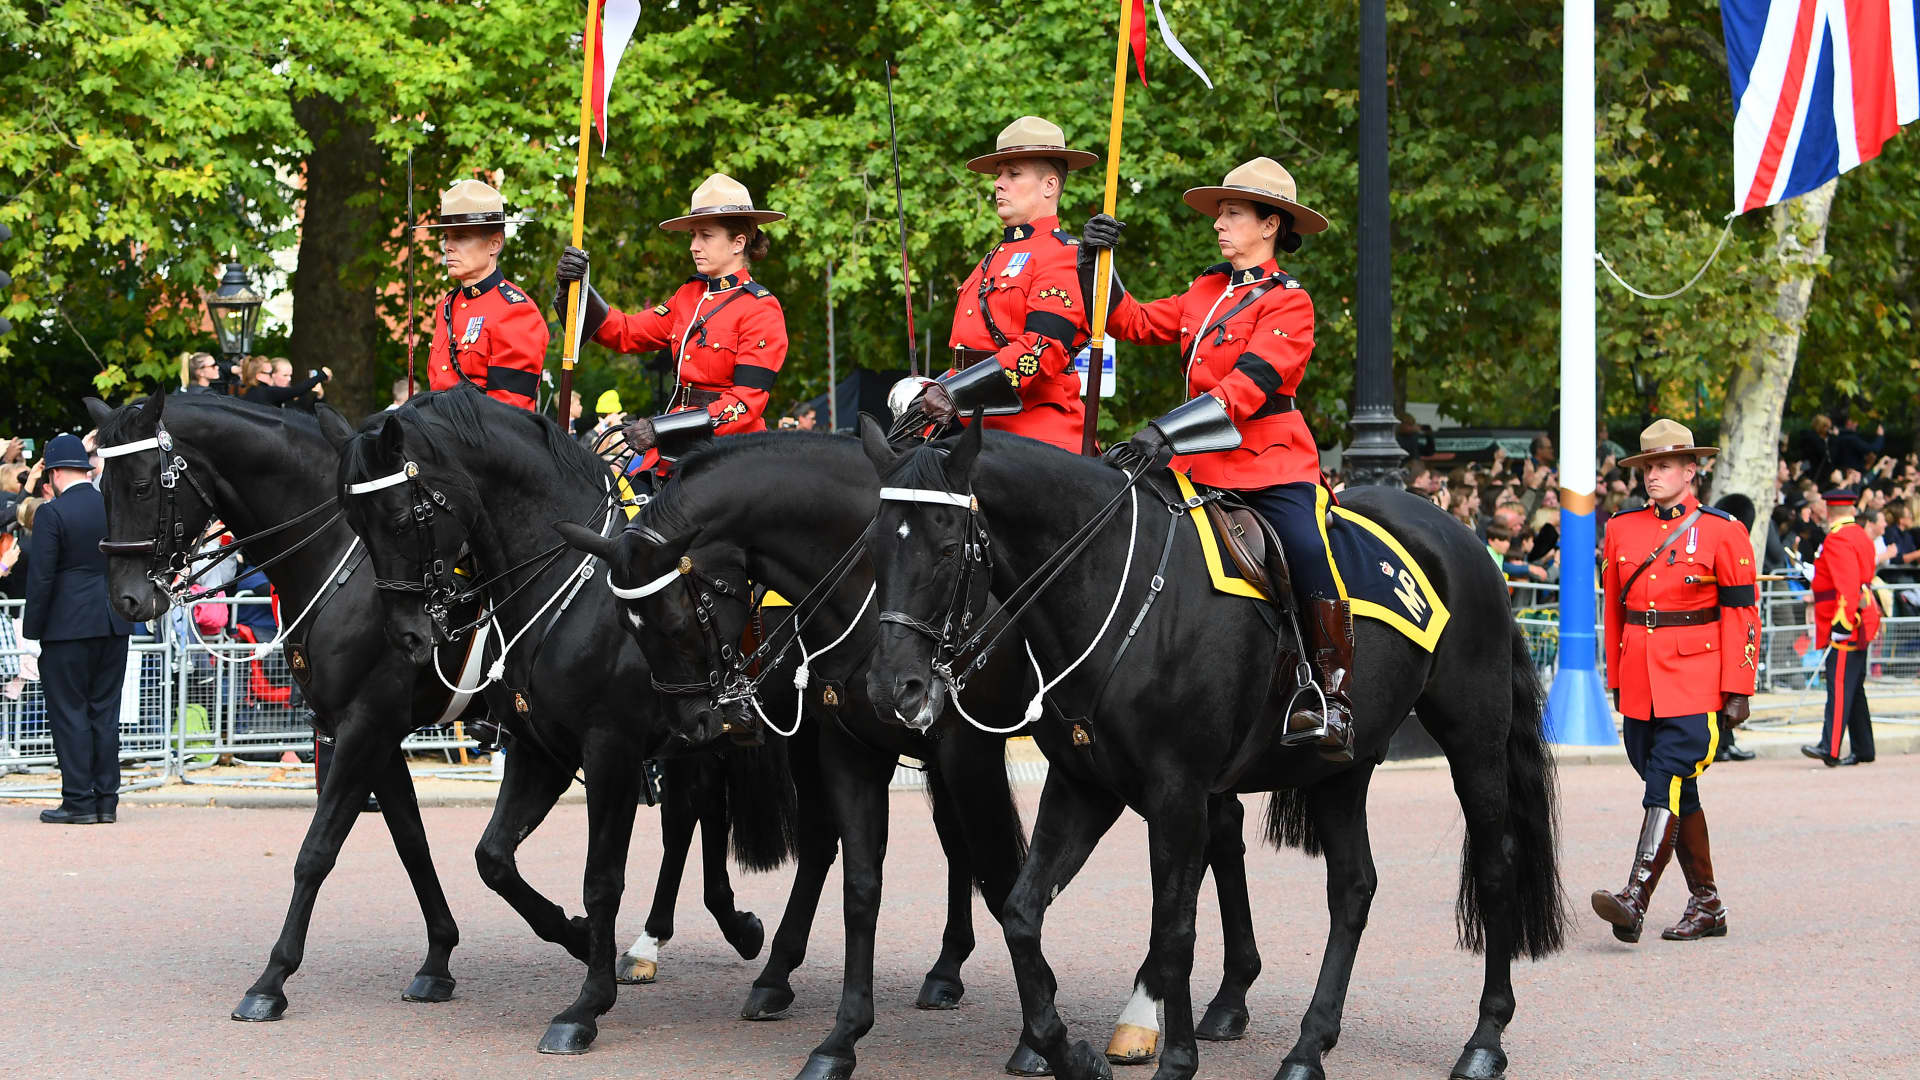 Royal Canadian Mounted Police Horse Guards Parade after the State Funeral of Queen Elizabeth II along The Mall on September 19, 2022 in London, England. Elizabeth Alexandra Mary Windsor was born in Bruton Street, Mayfair, London on 21 April 1926.